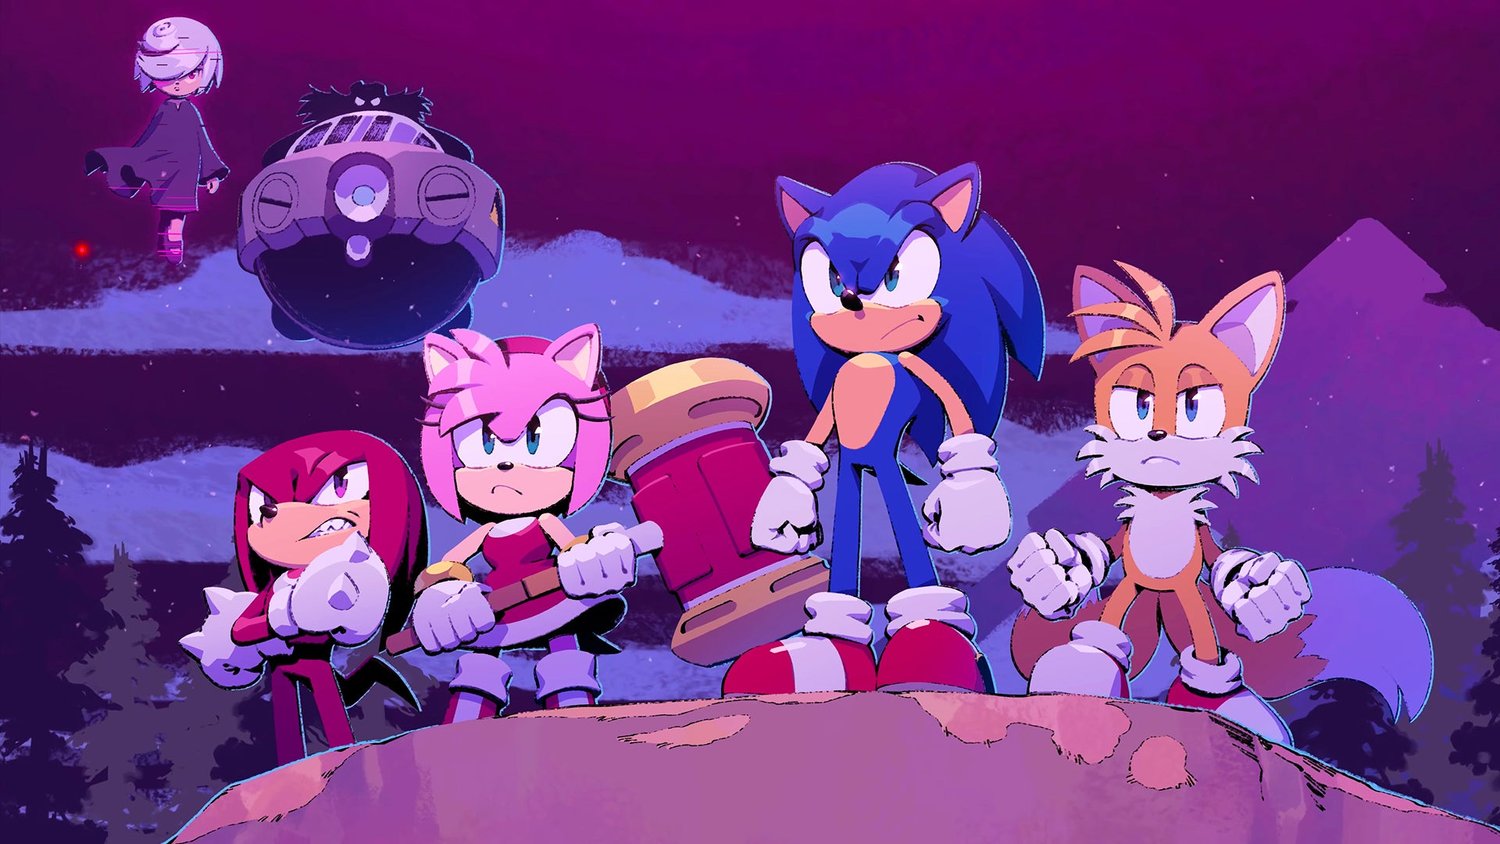 cohost! - Sonic Frontiers: The Final Horizon thoughts